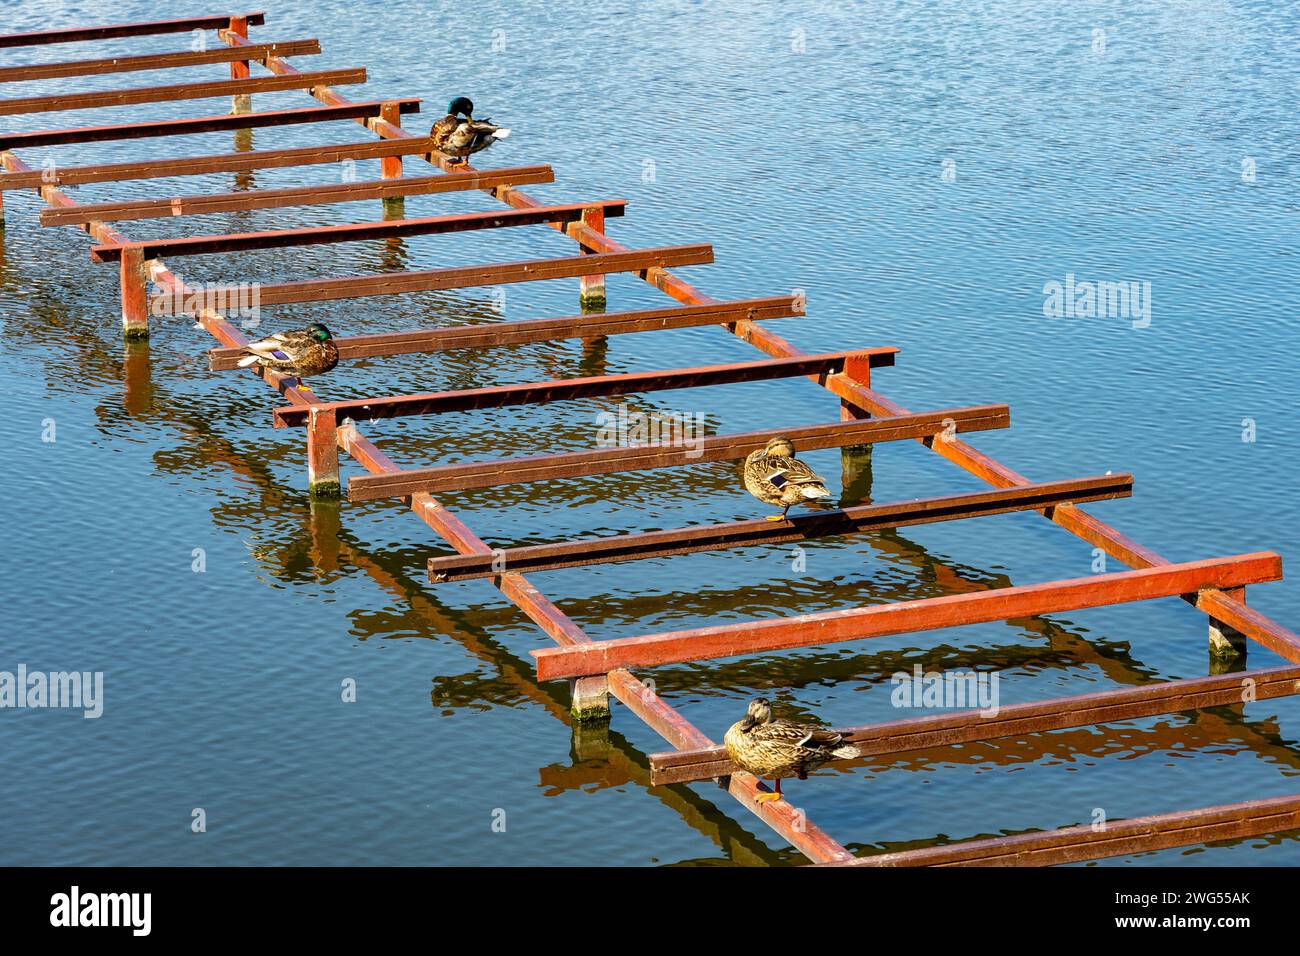 Wild ducks sit on a metal structure on a lake. Stock Photo